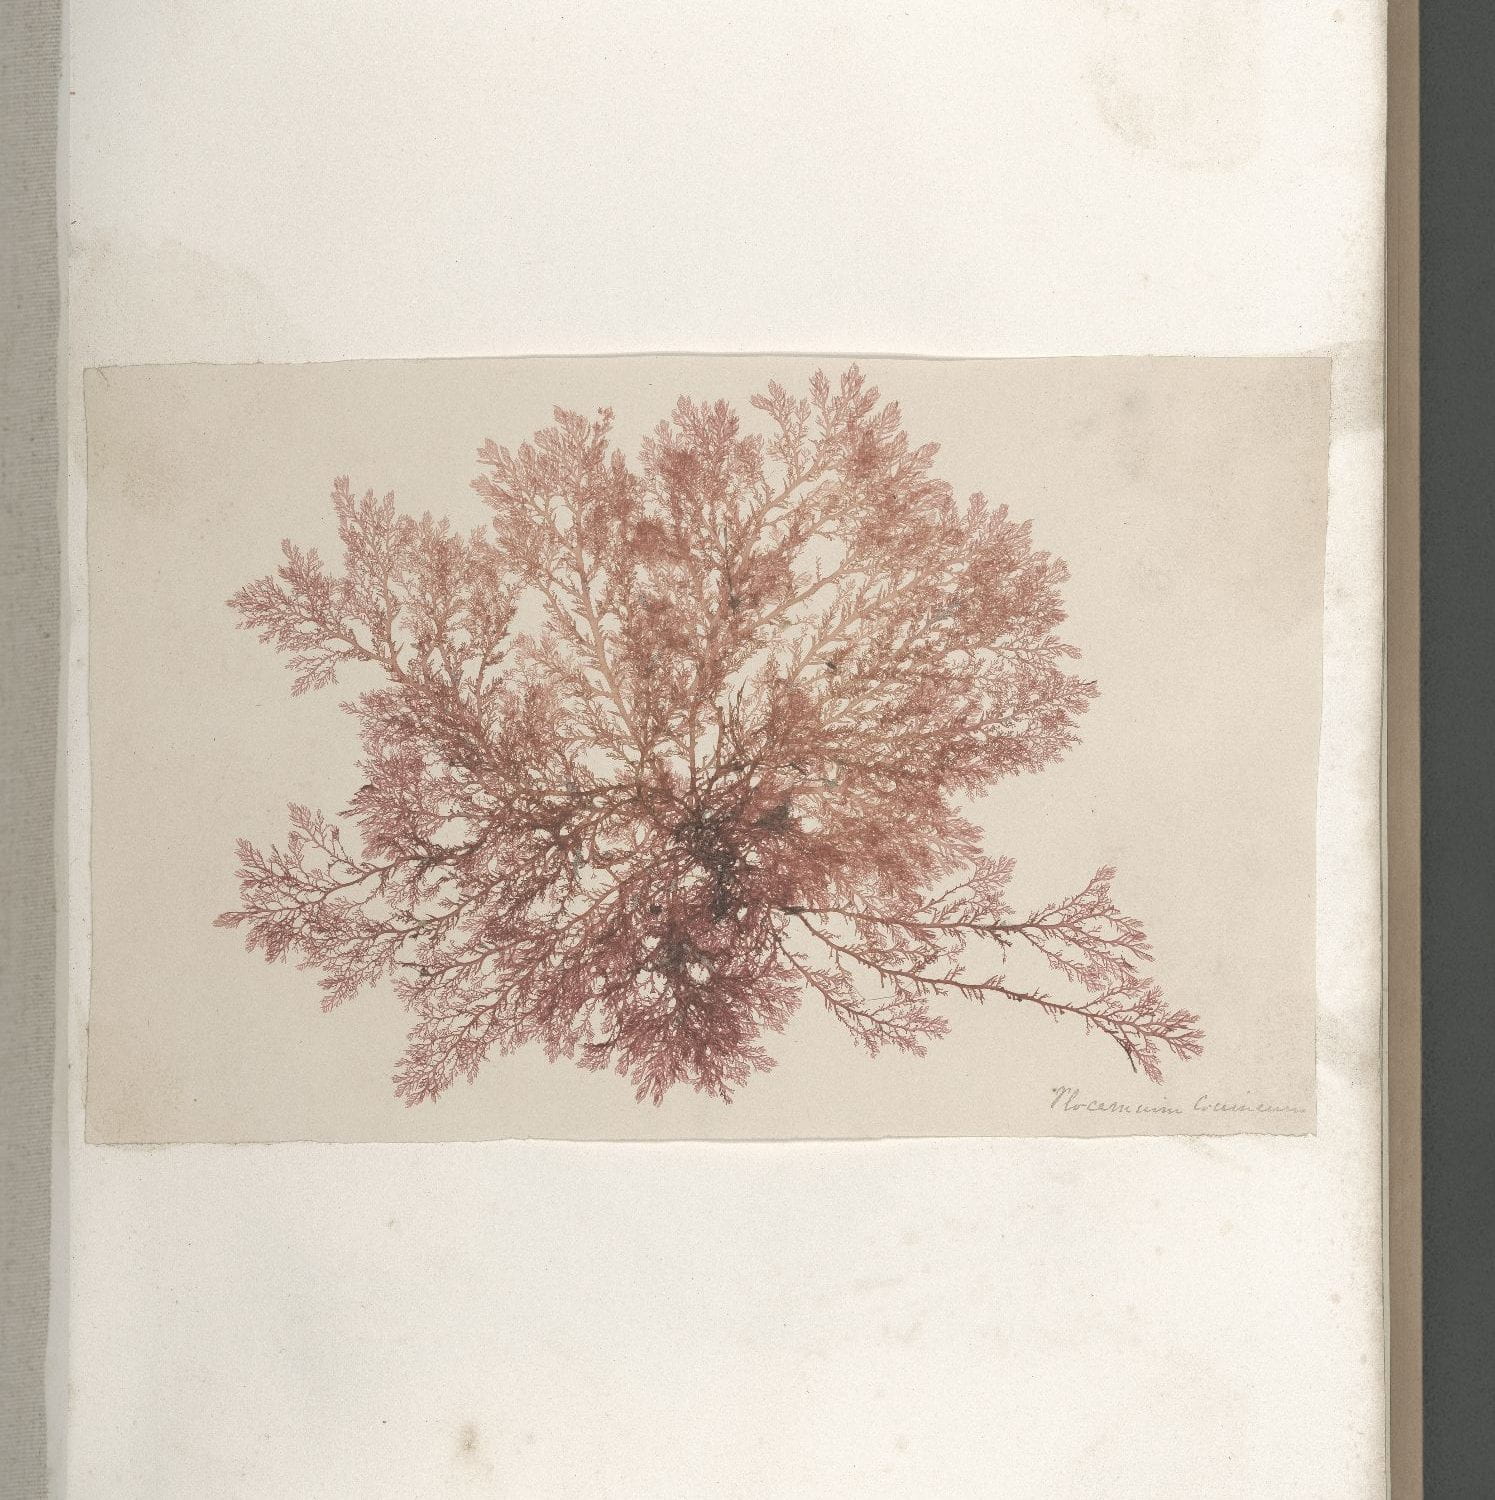 Page 14 of Seaweeds, Great Britain, circa 1850